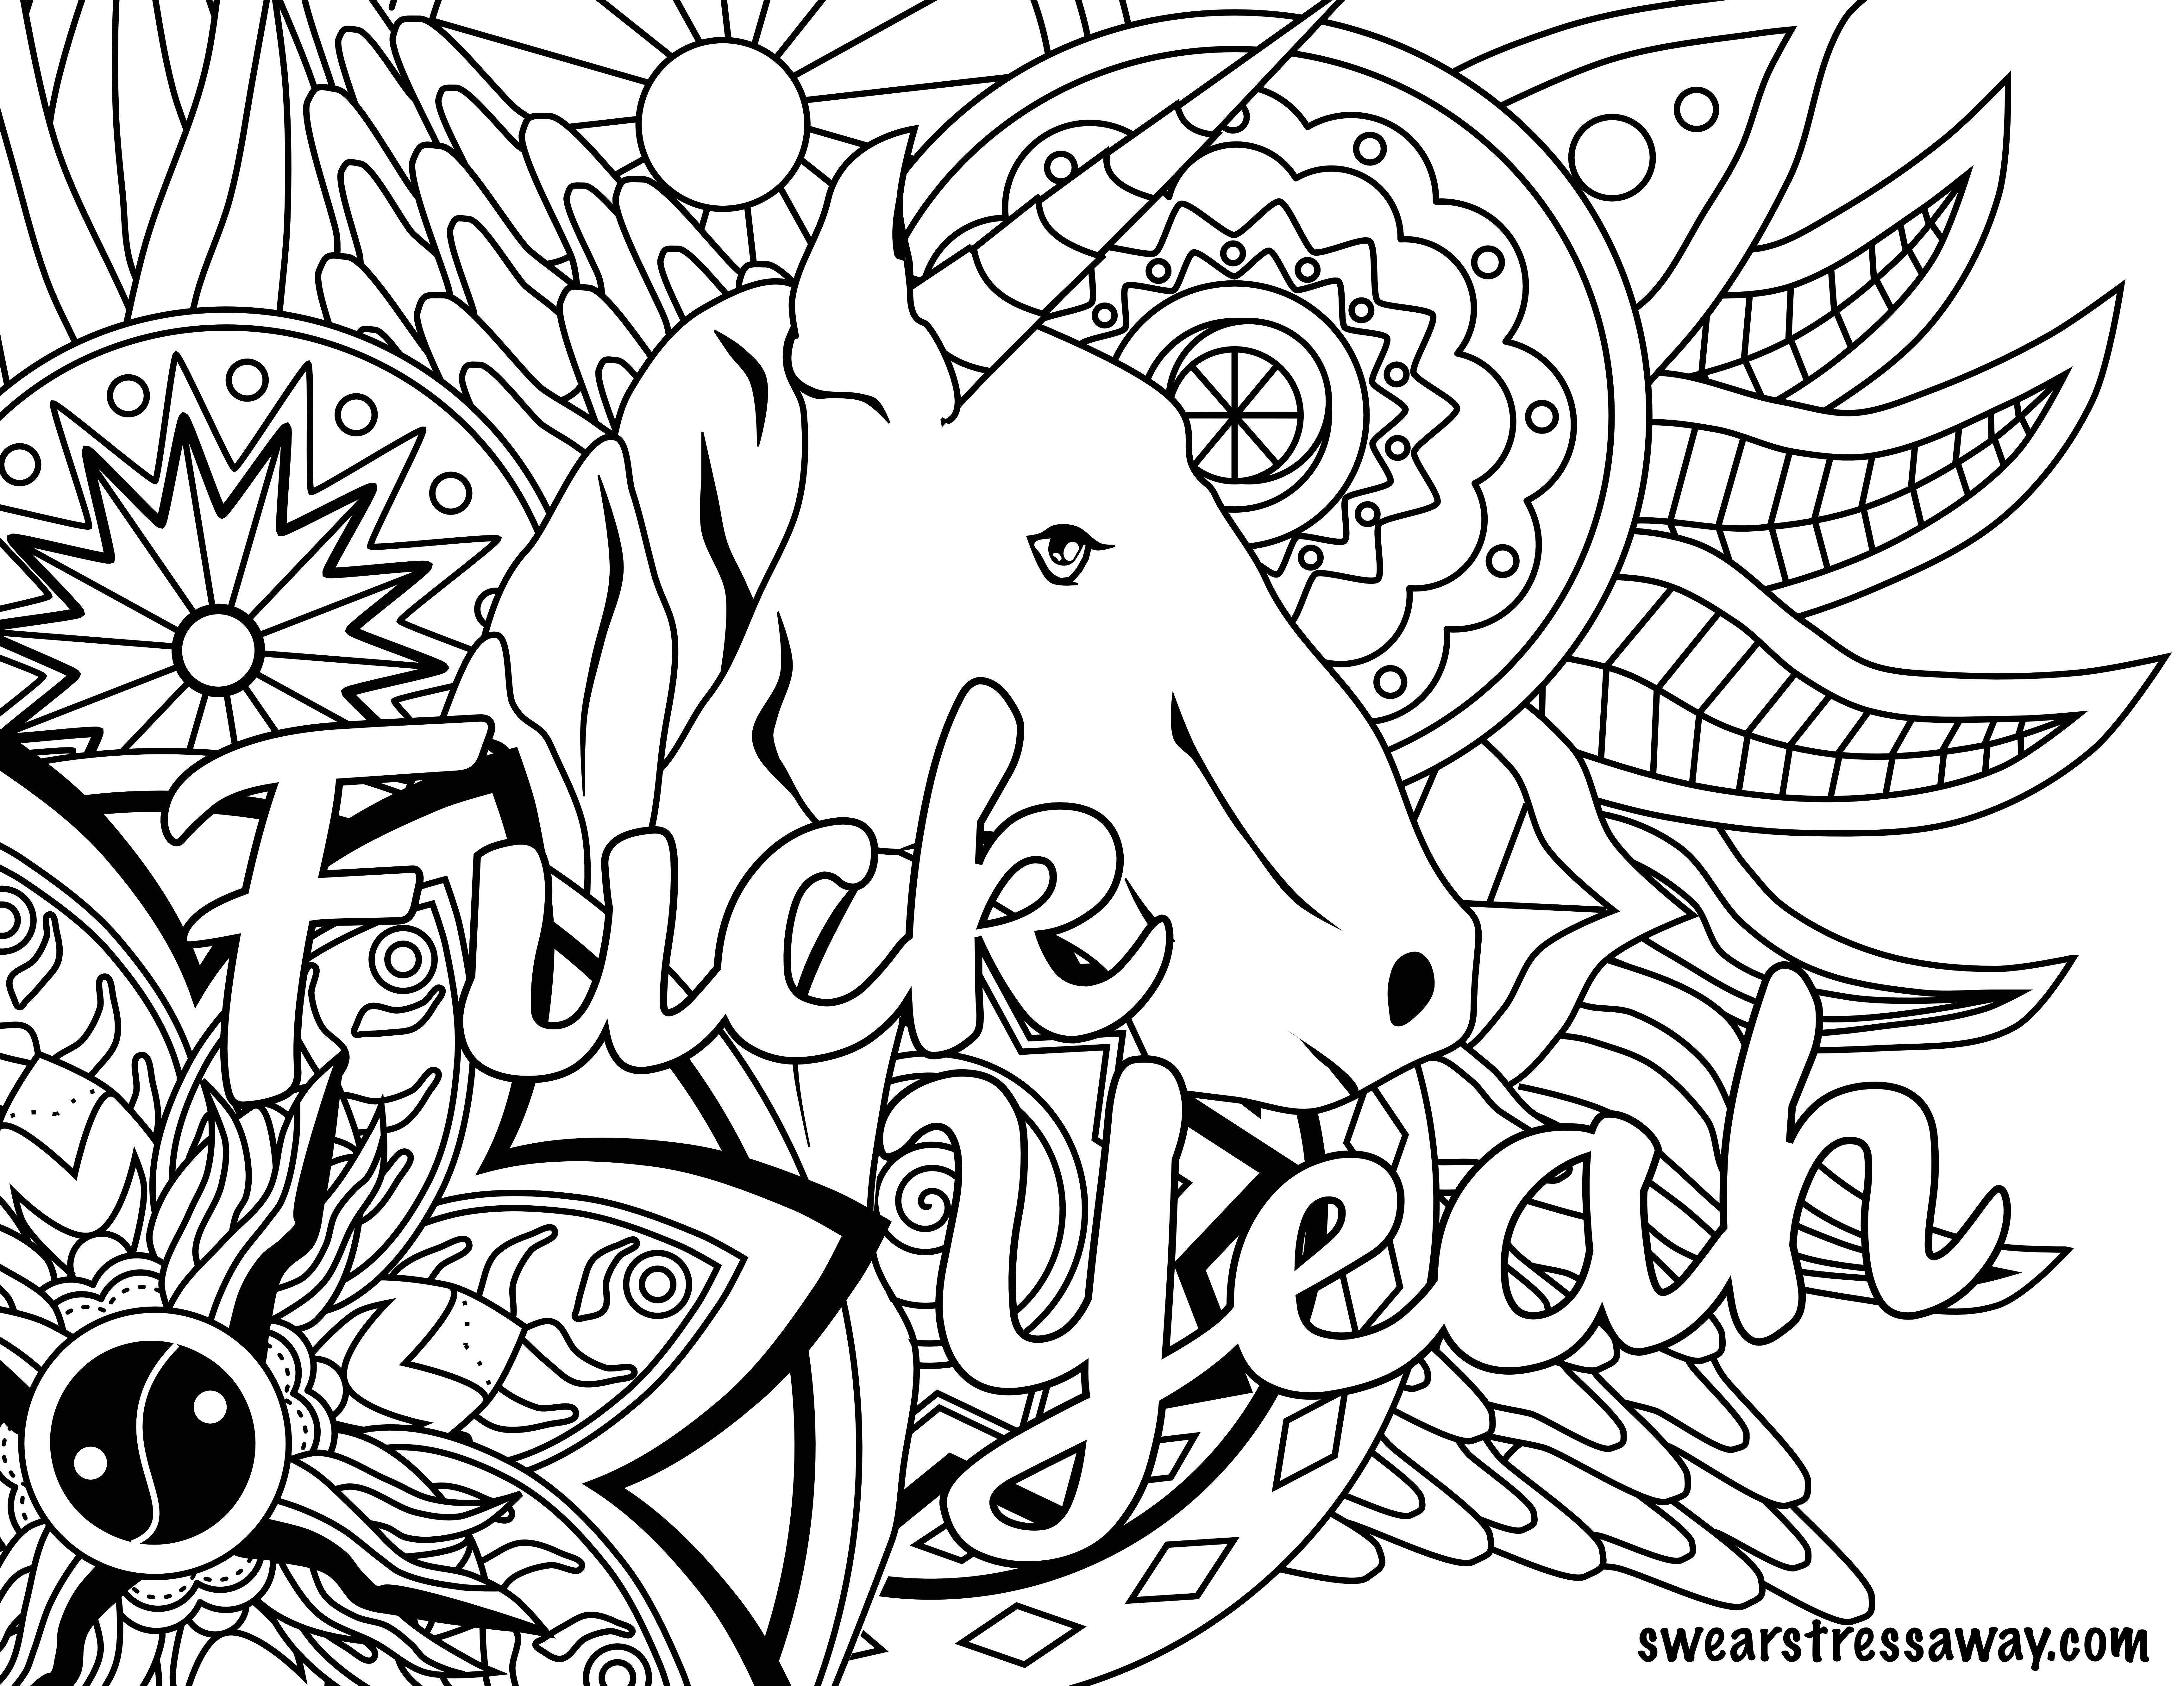 420 Coloring Pages at GetDrawings Free download